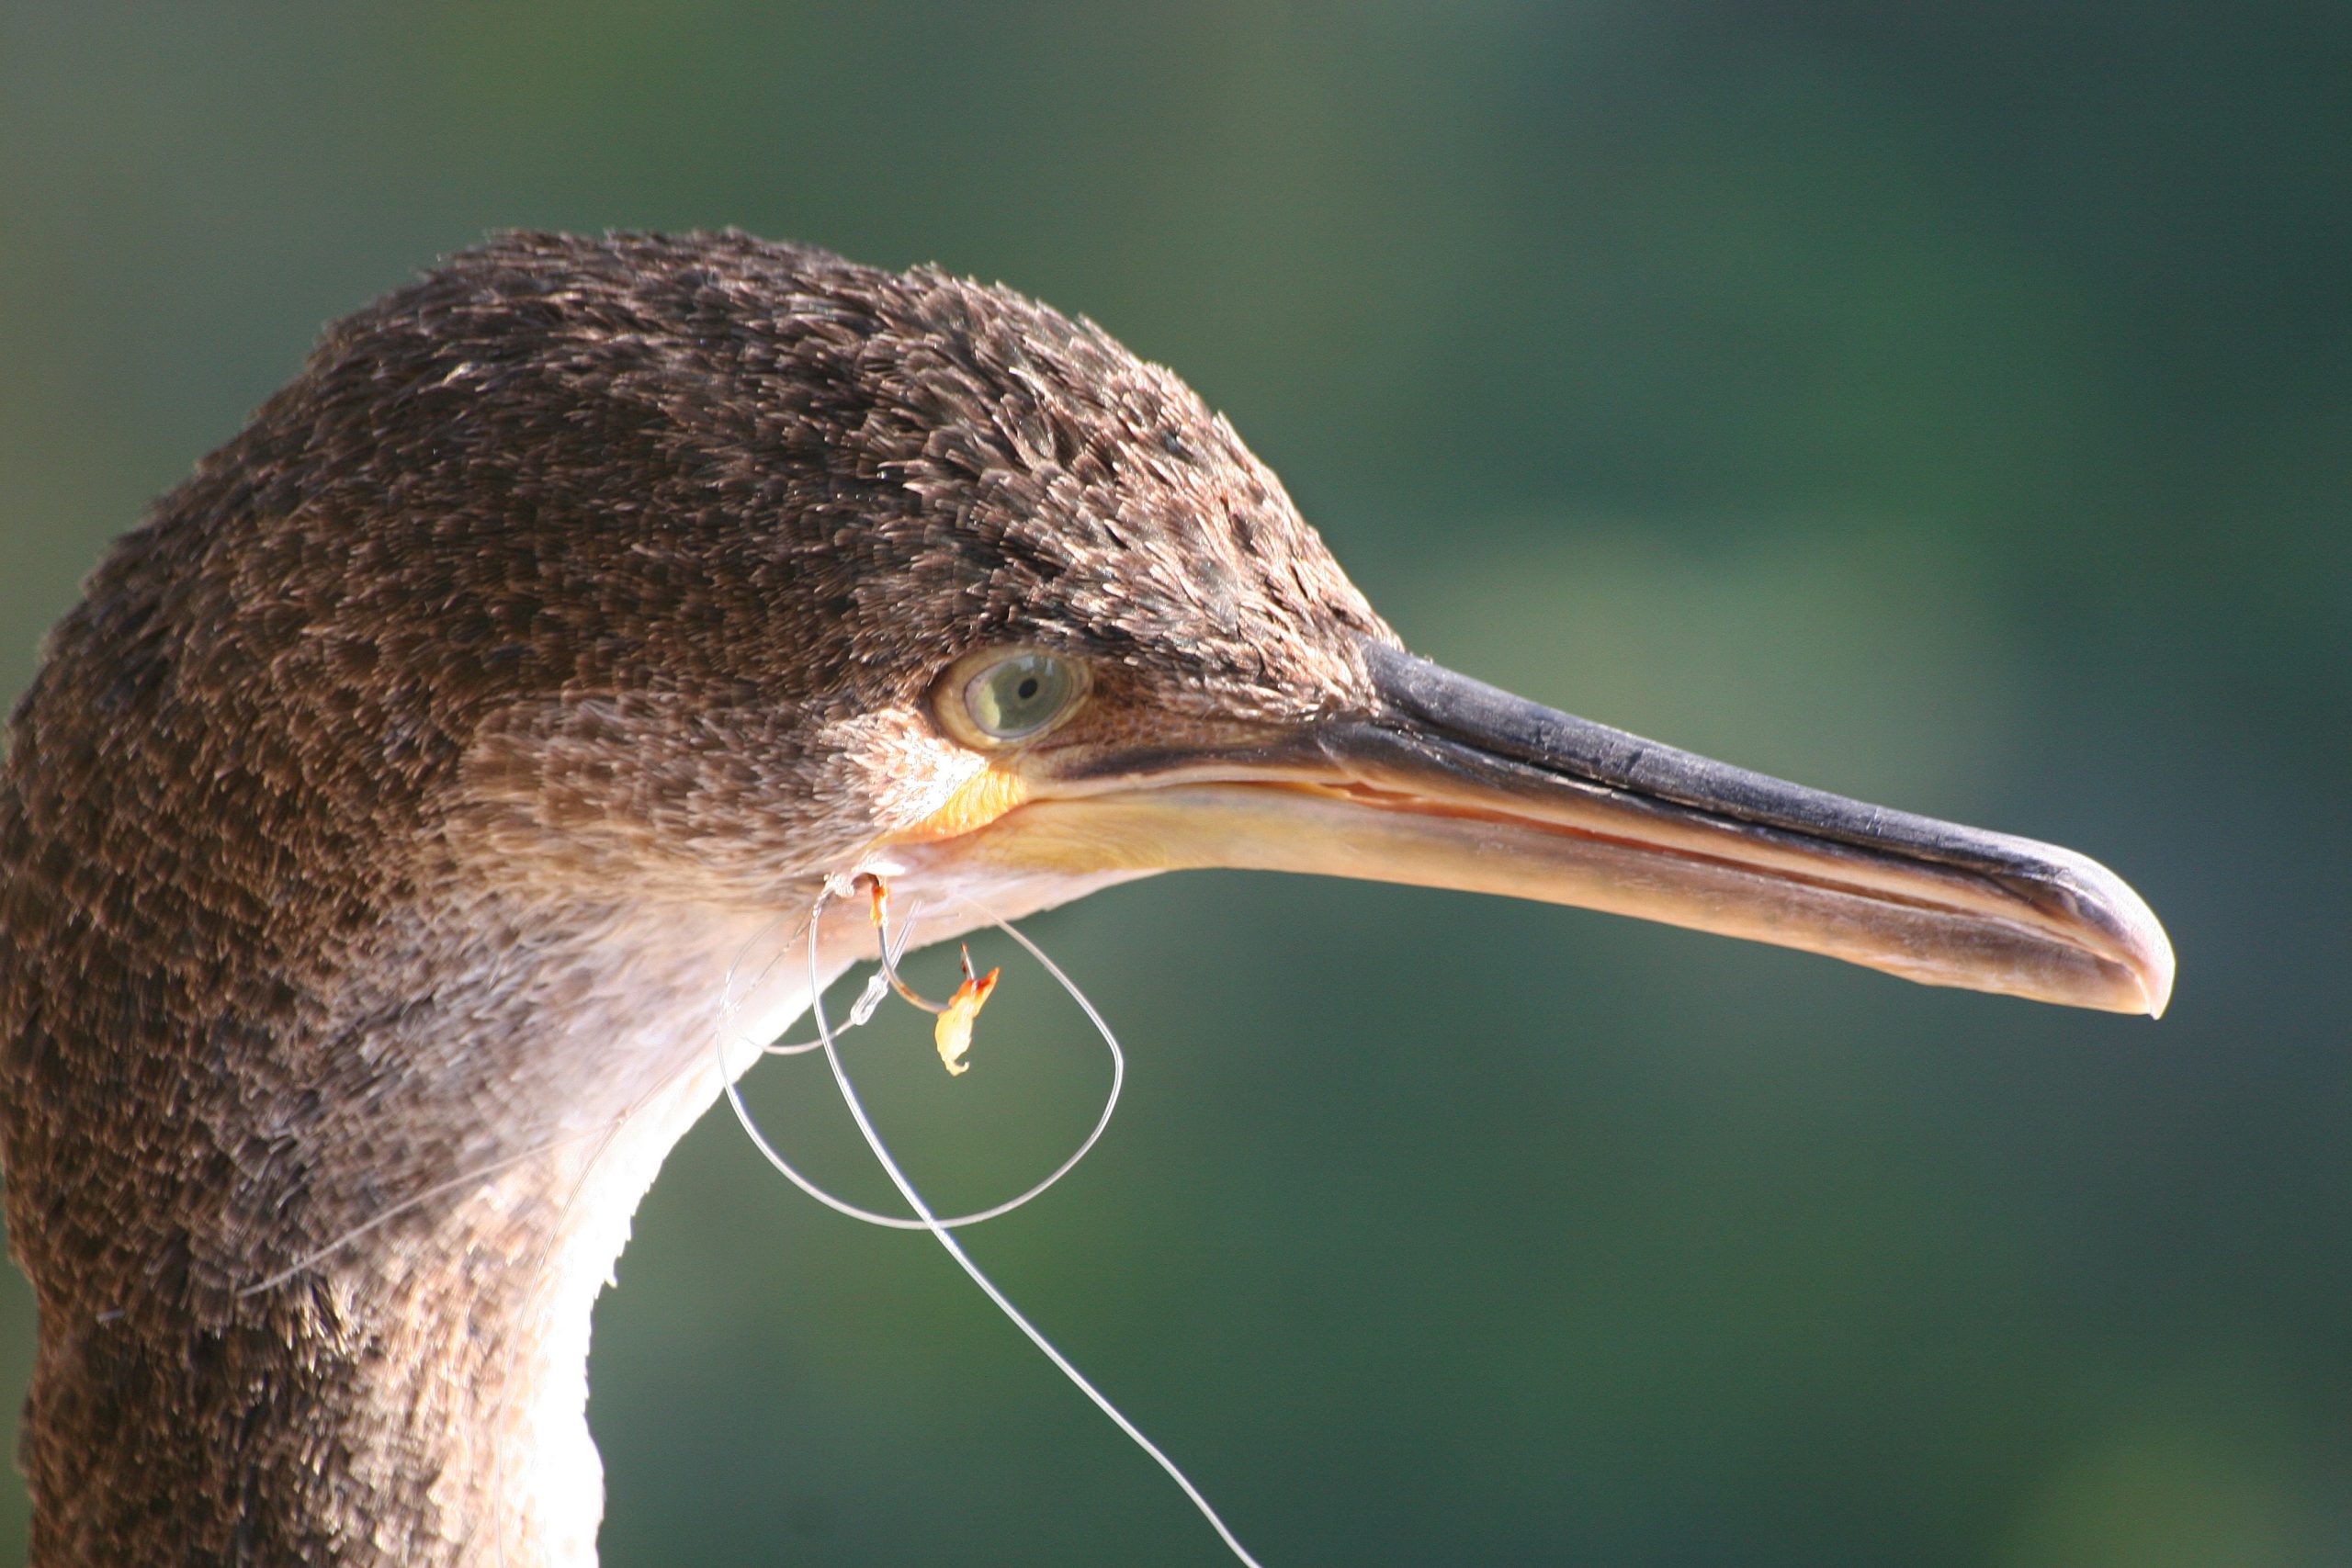 Young cormorant with fishing line and hook caught in beak.